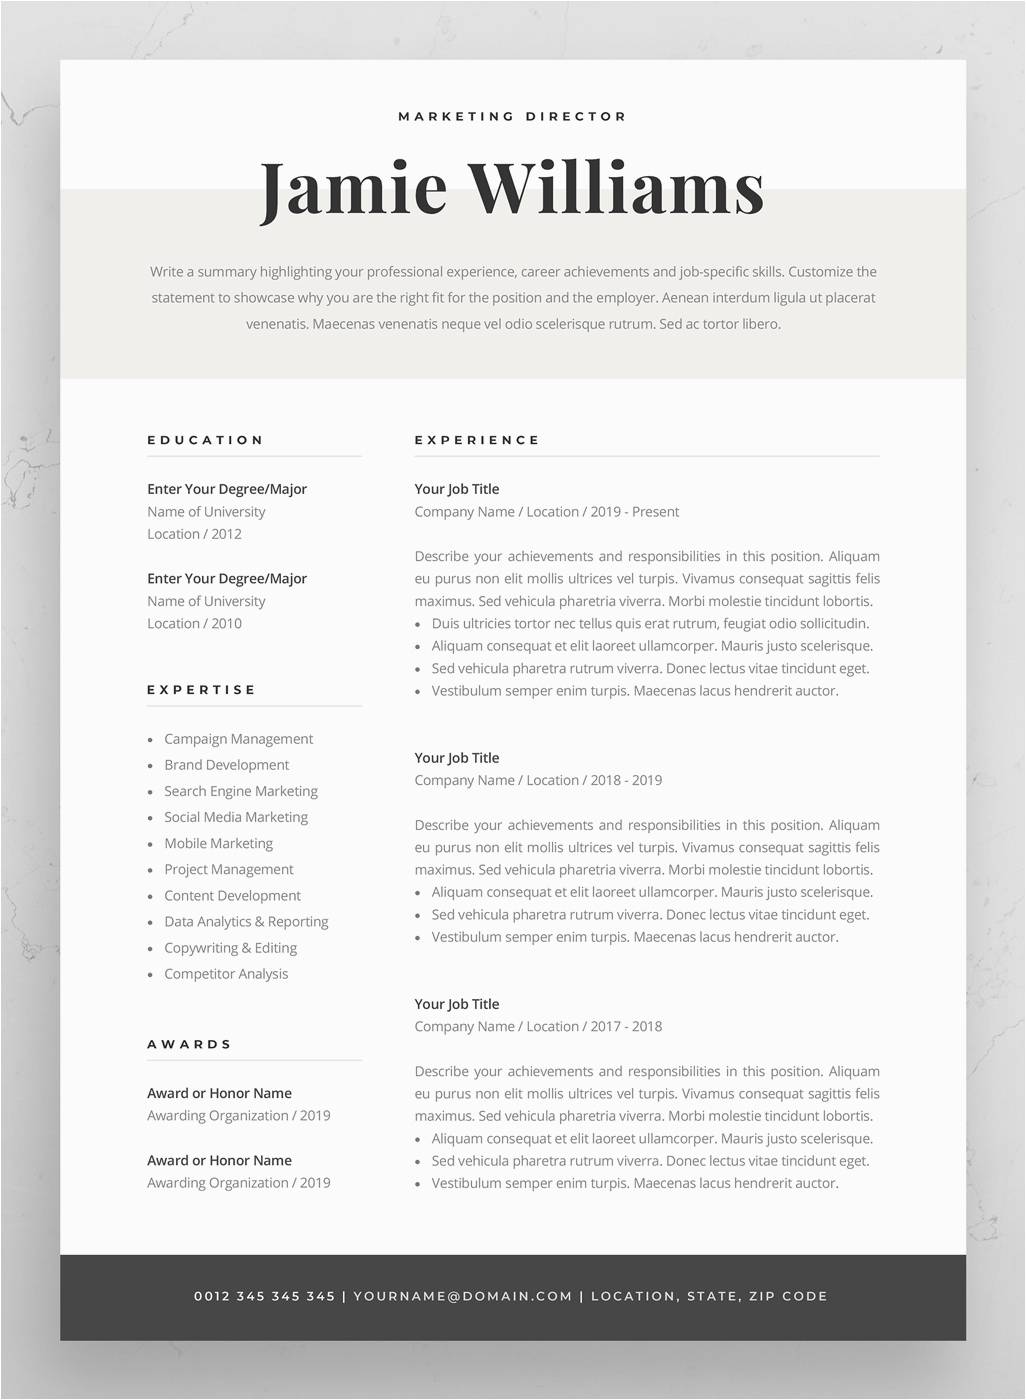 Free Creative Resume and Cover Letter Template Simple Cover Letter Example Cv Template Modern Resume